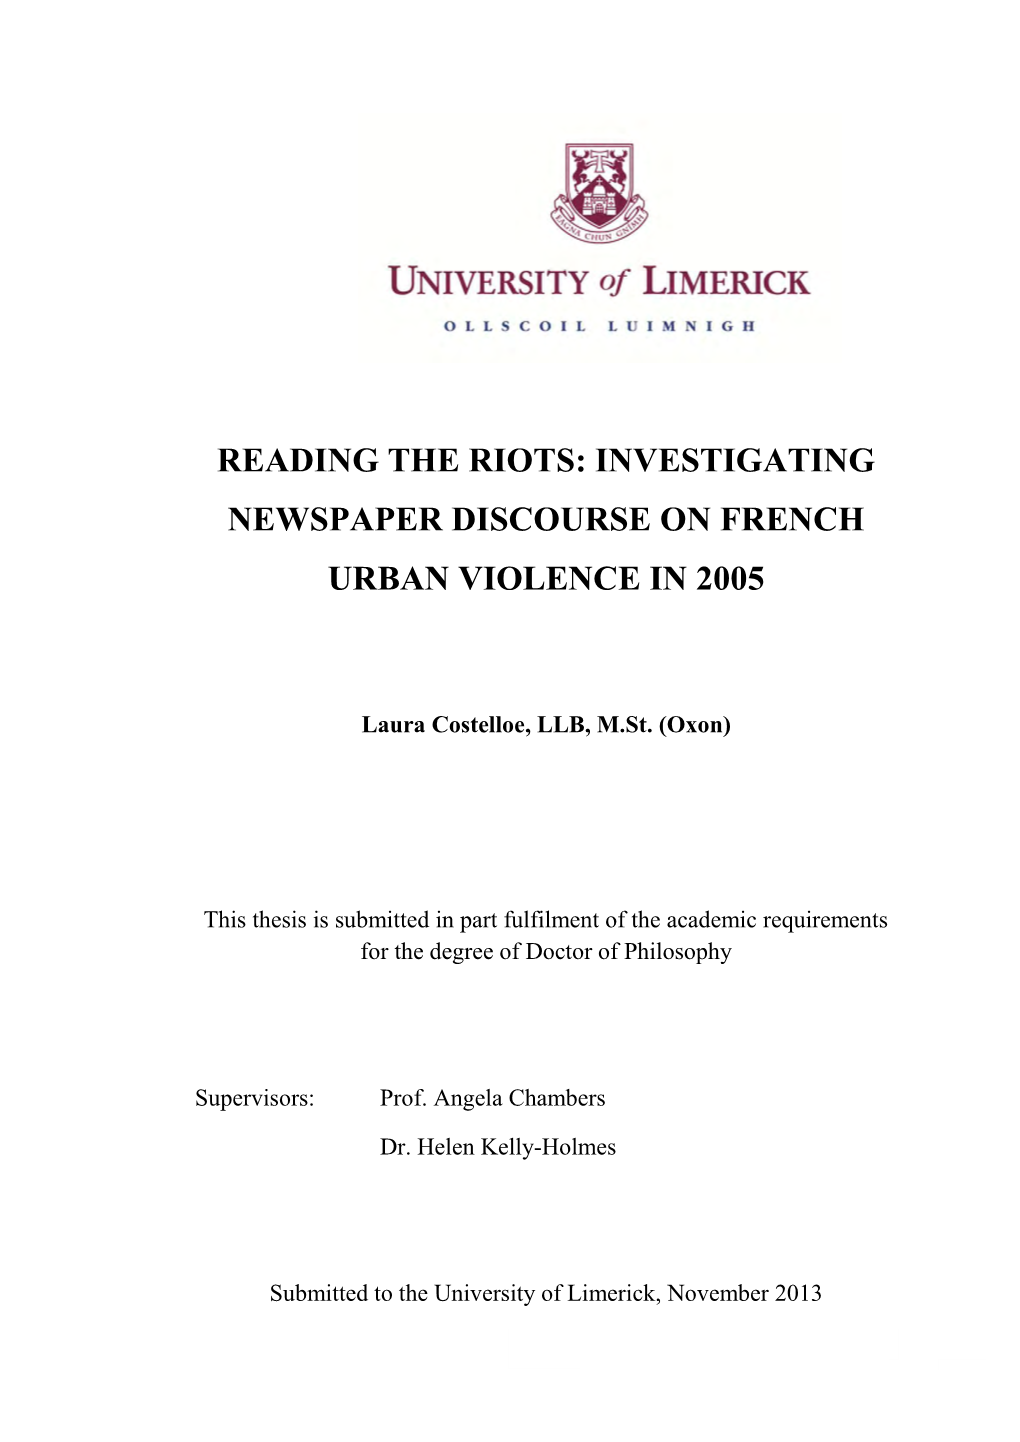 Reading the Riots: Investigating Newspaper Discourse on French Urban Violence in 2005